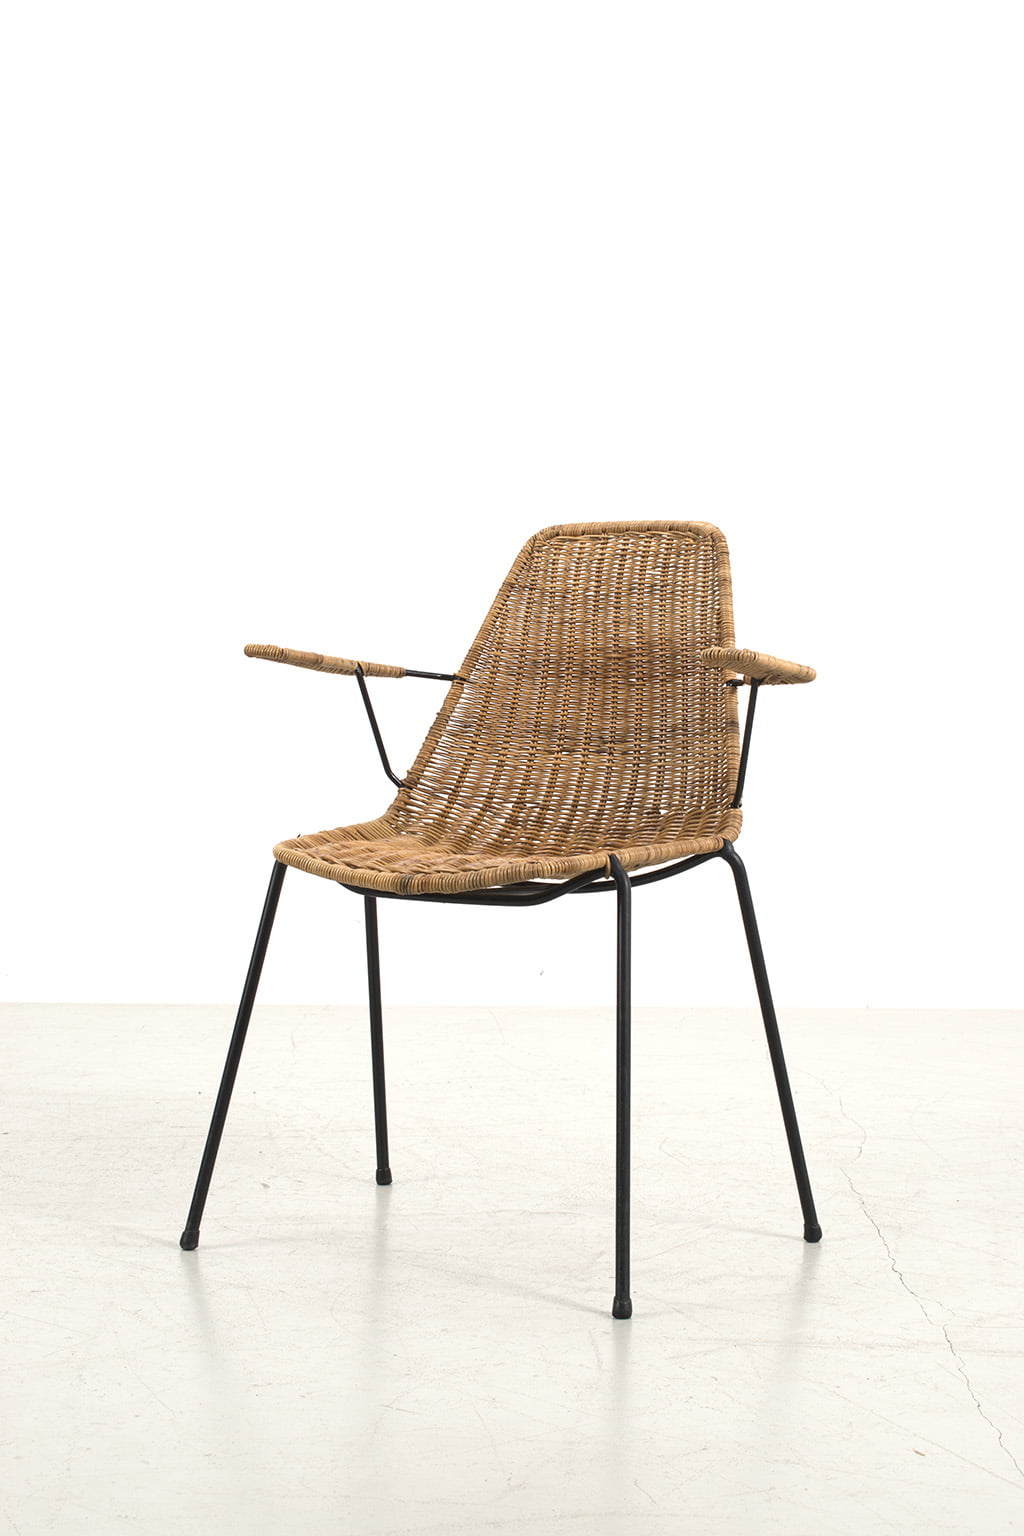 Campo and Graffi chair